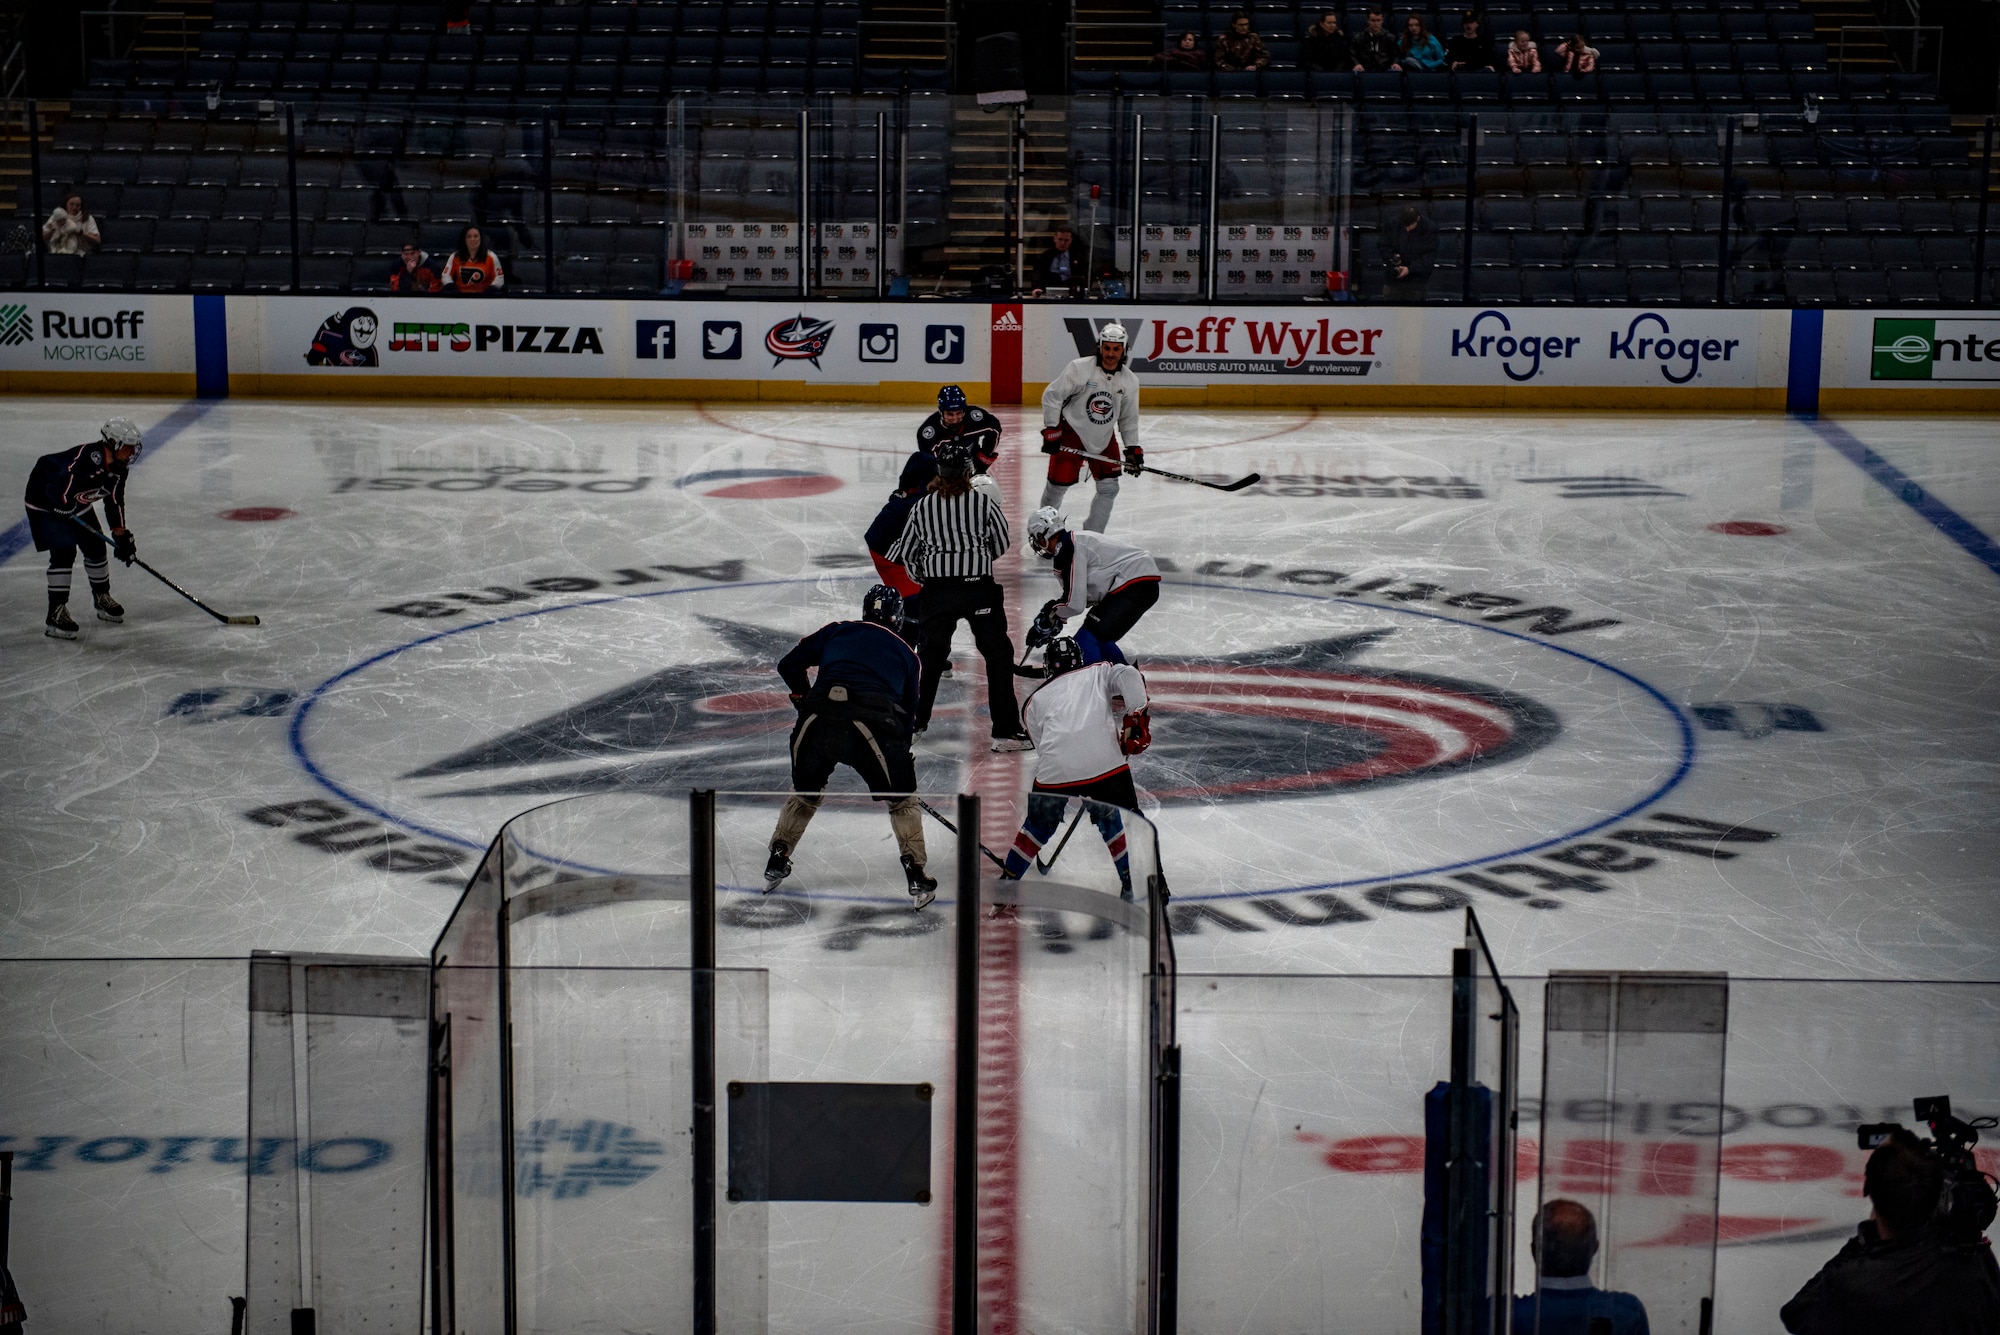 The Wright Flyers and former Columbus Blue Jackets players prepare for the puck drop to start a scrimmage  April 7, 2022, at Nationwide Arena, Columbus, Ohio. Prior to facing the Philadelphia Flyers, the Blue Jackets kicked off their annual Military Appreciation Night with a friendly exhibition game featuring Columbus alumni and the Wright Flyers, a recreation team made up of military and civilian personnel from Wright-Patterson Air Force Base.
(U.S. Air Force photo by Senior Airman Jack Gardner)